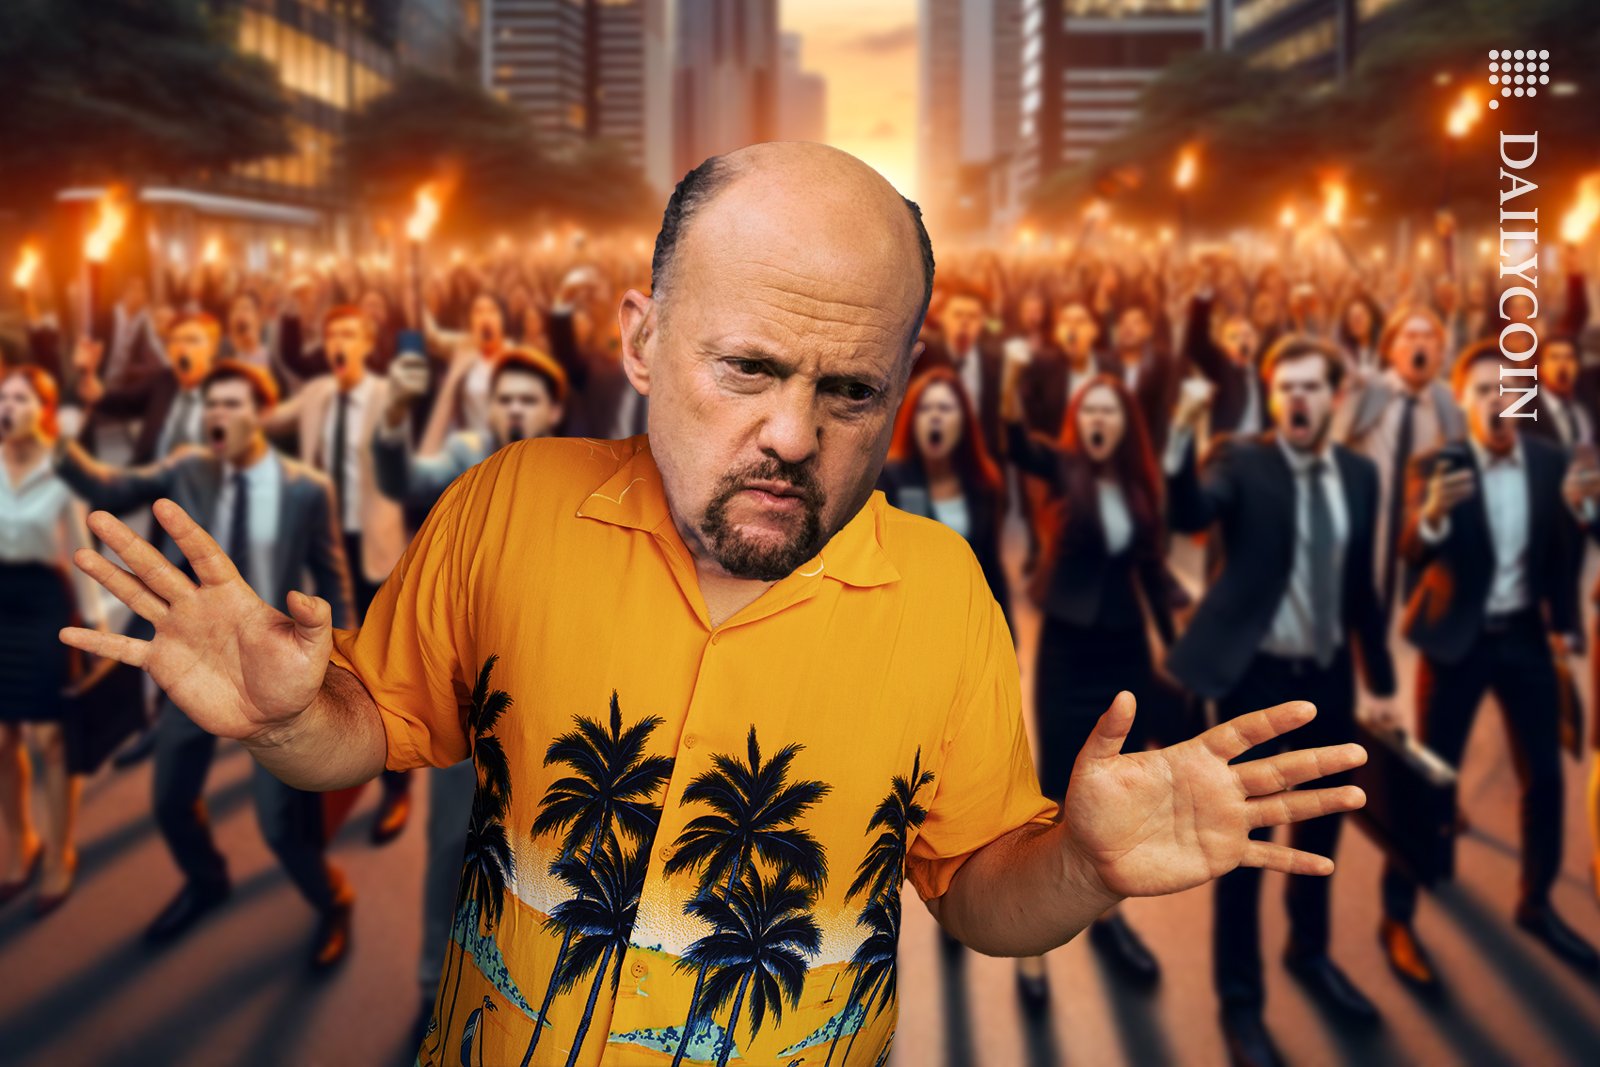 Jim Cramer being chased with angry people.